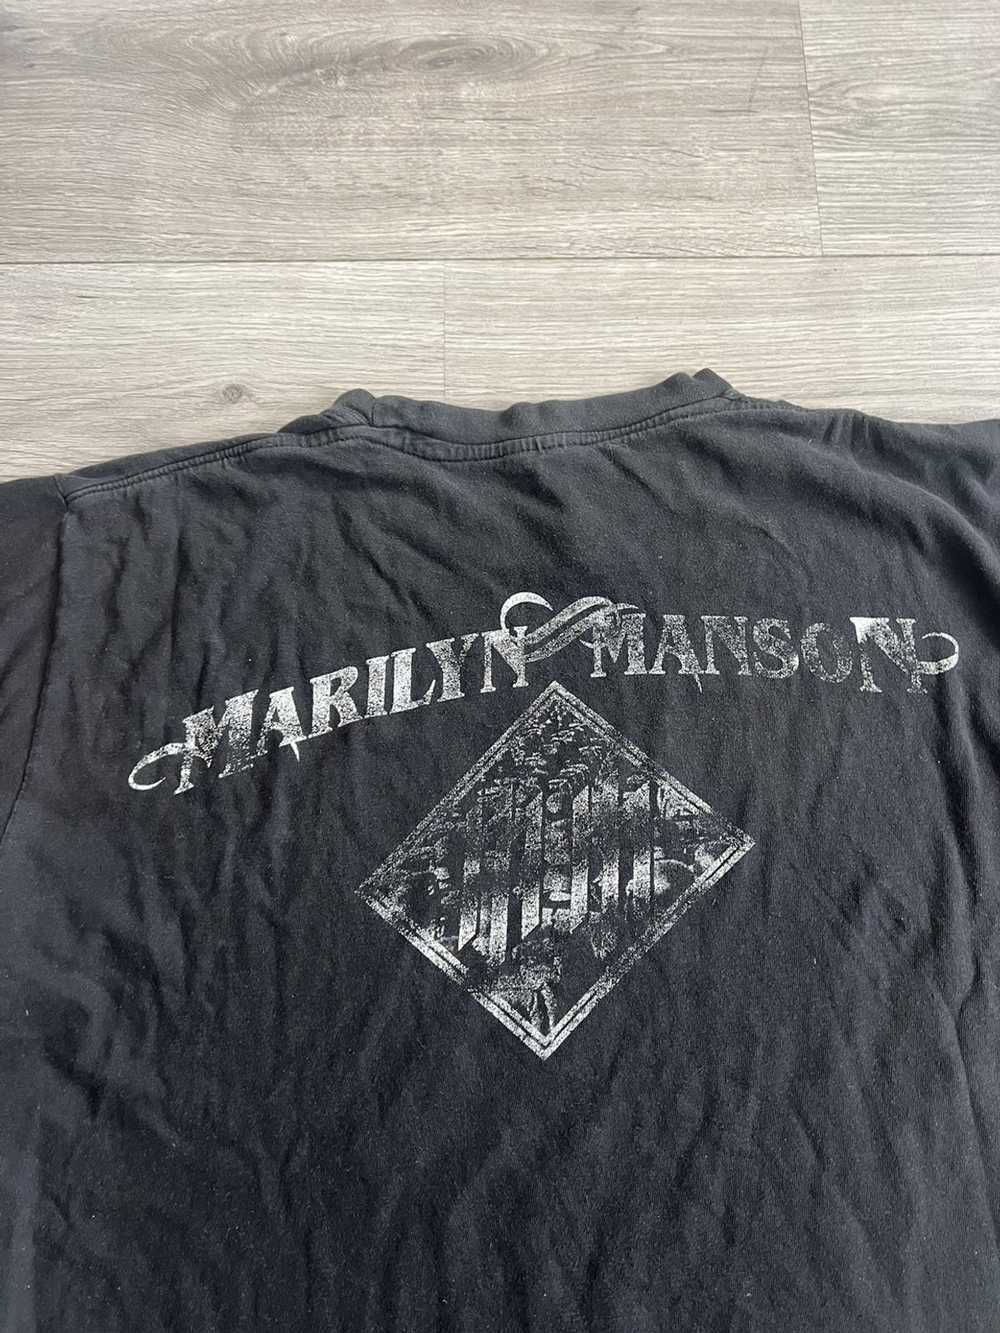 Vintage Original Marilyn Manson t-shirt with perf… - image 3